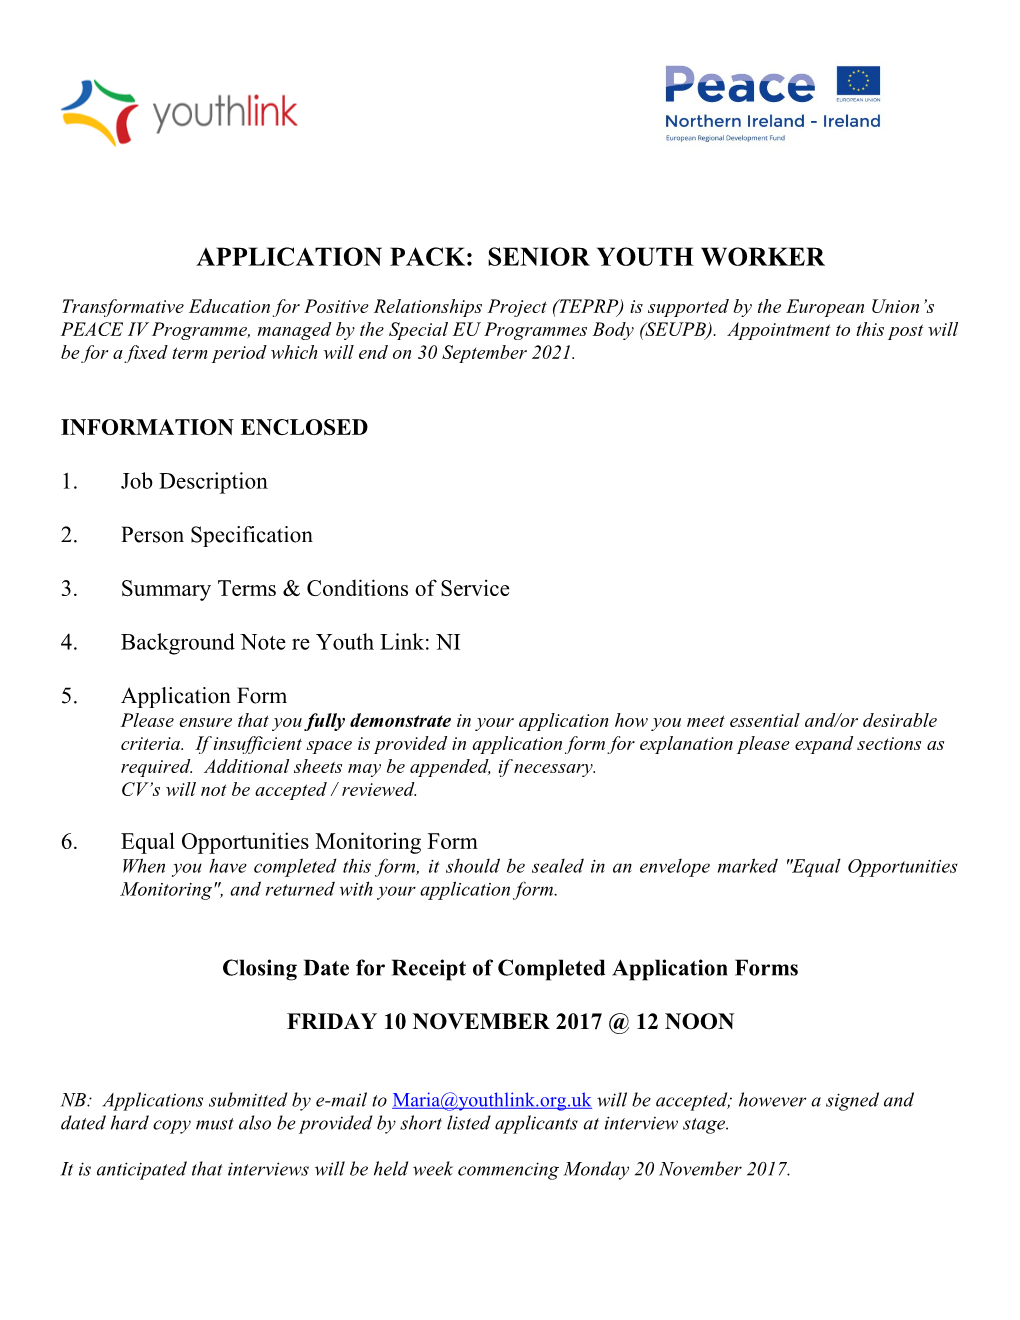 Application Pack: Senior Youth Worker